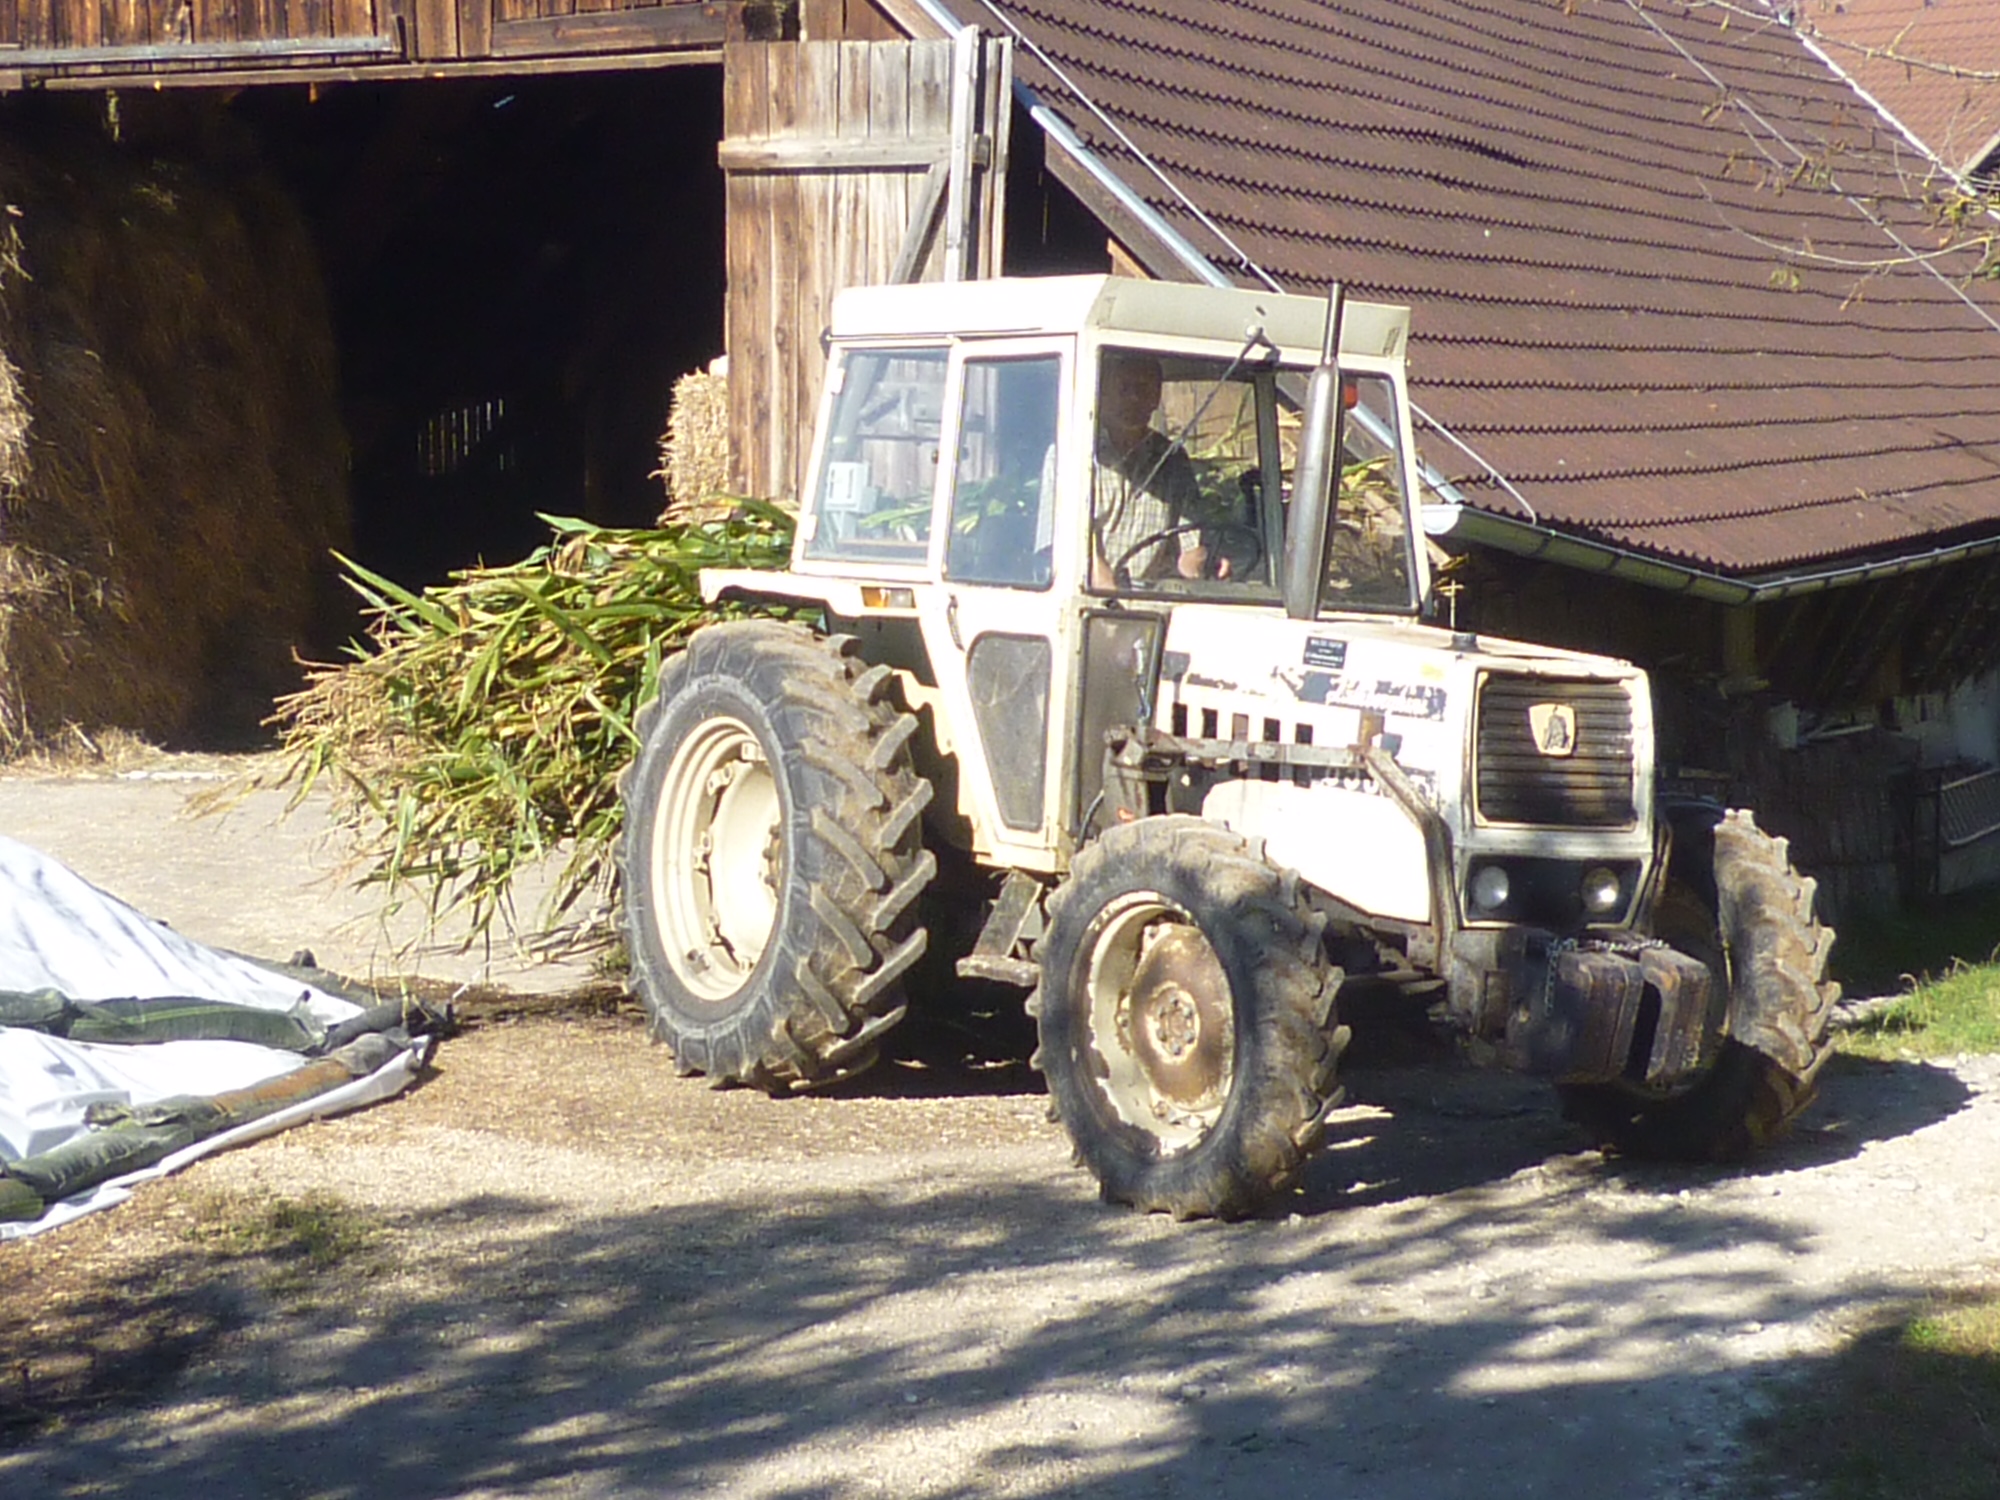 Austria: Lamborghini! Before poncy cars, they made tractors - and still do.